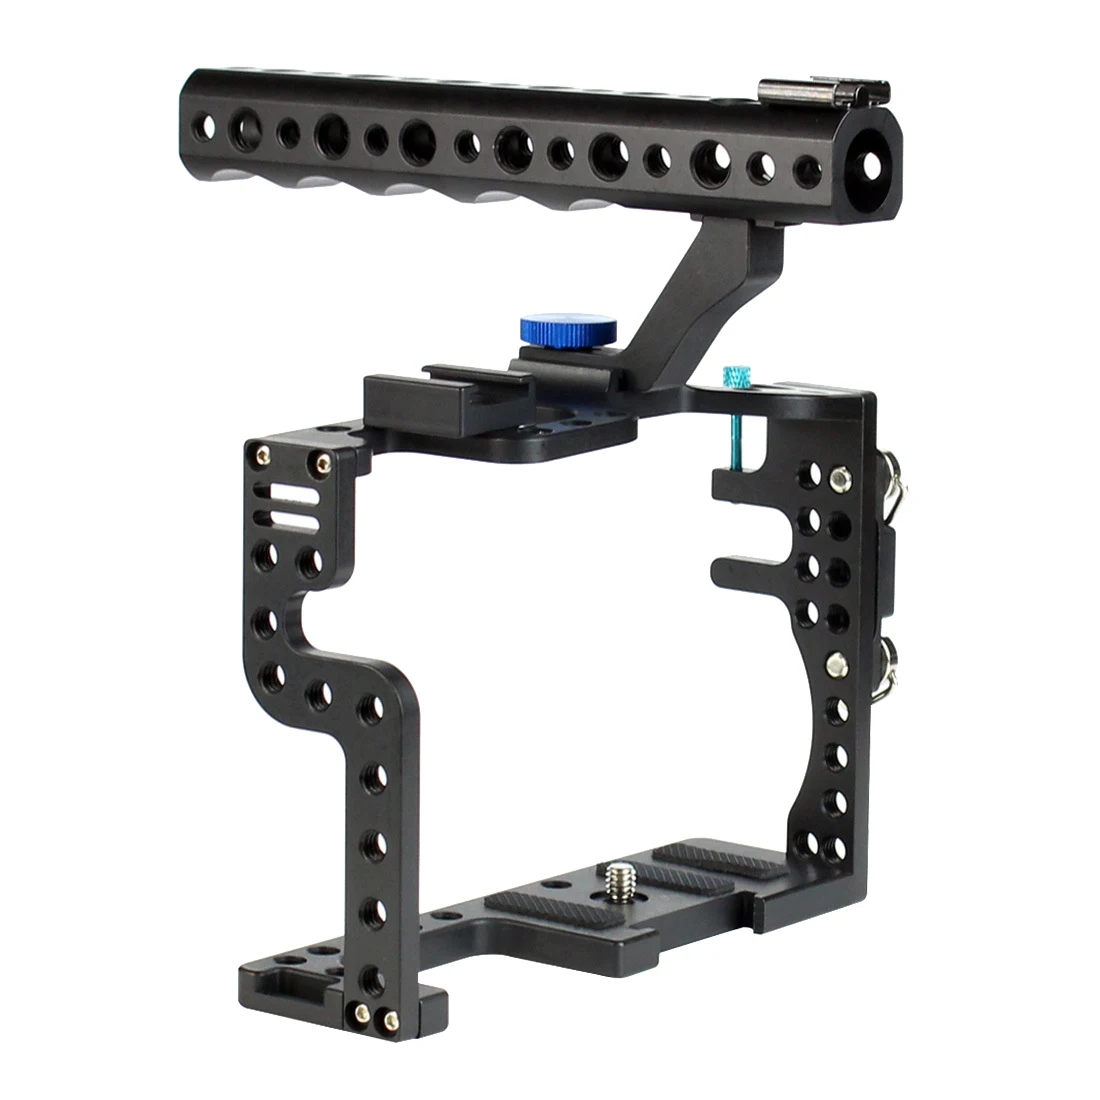 

Camera Cage Stabilizer, Aluminum Alloy Camera Video Cage for Panasonic LUMIX GH3/GH4 with Top Handle